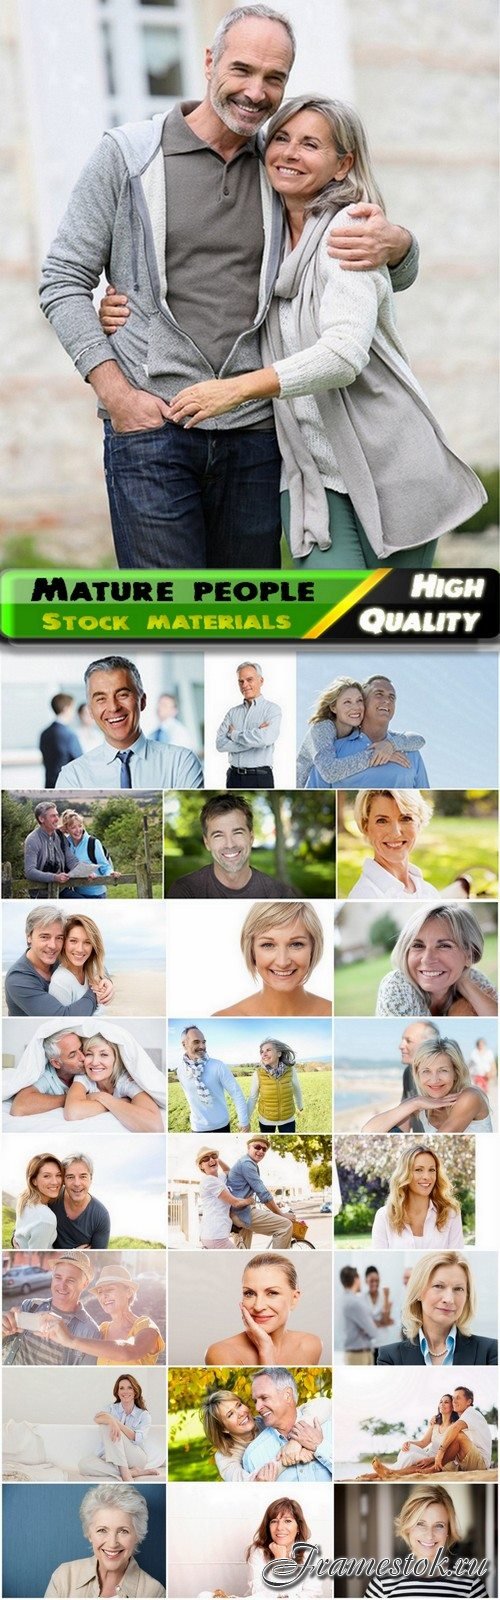 Mature people and happy couples - 25 HQ Jpg